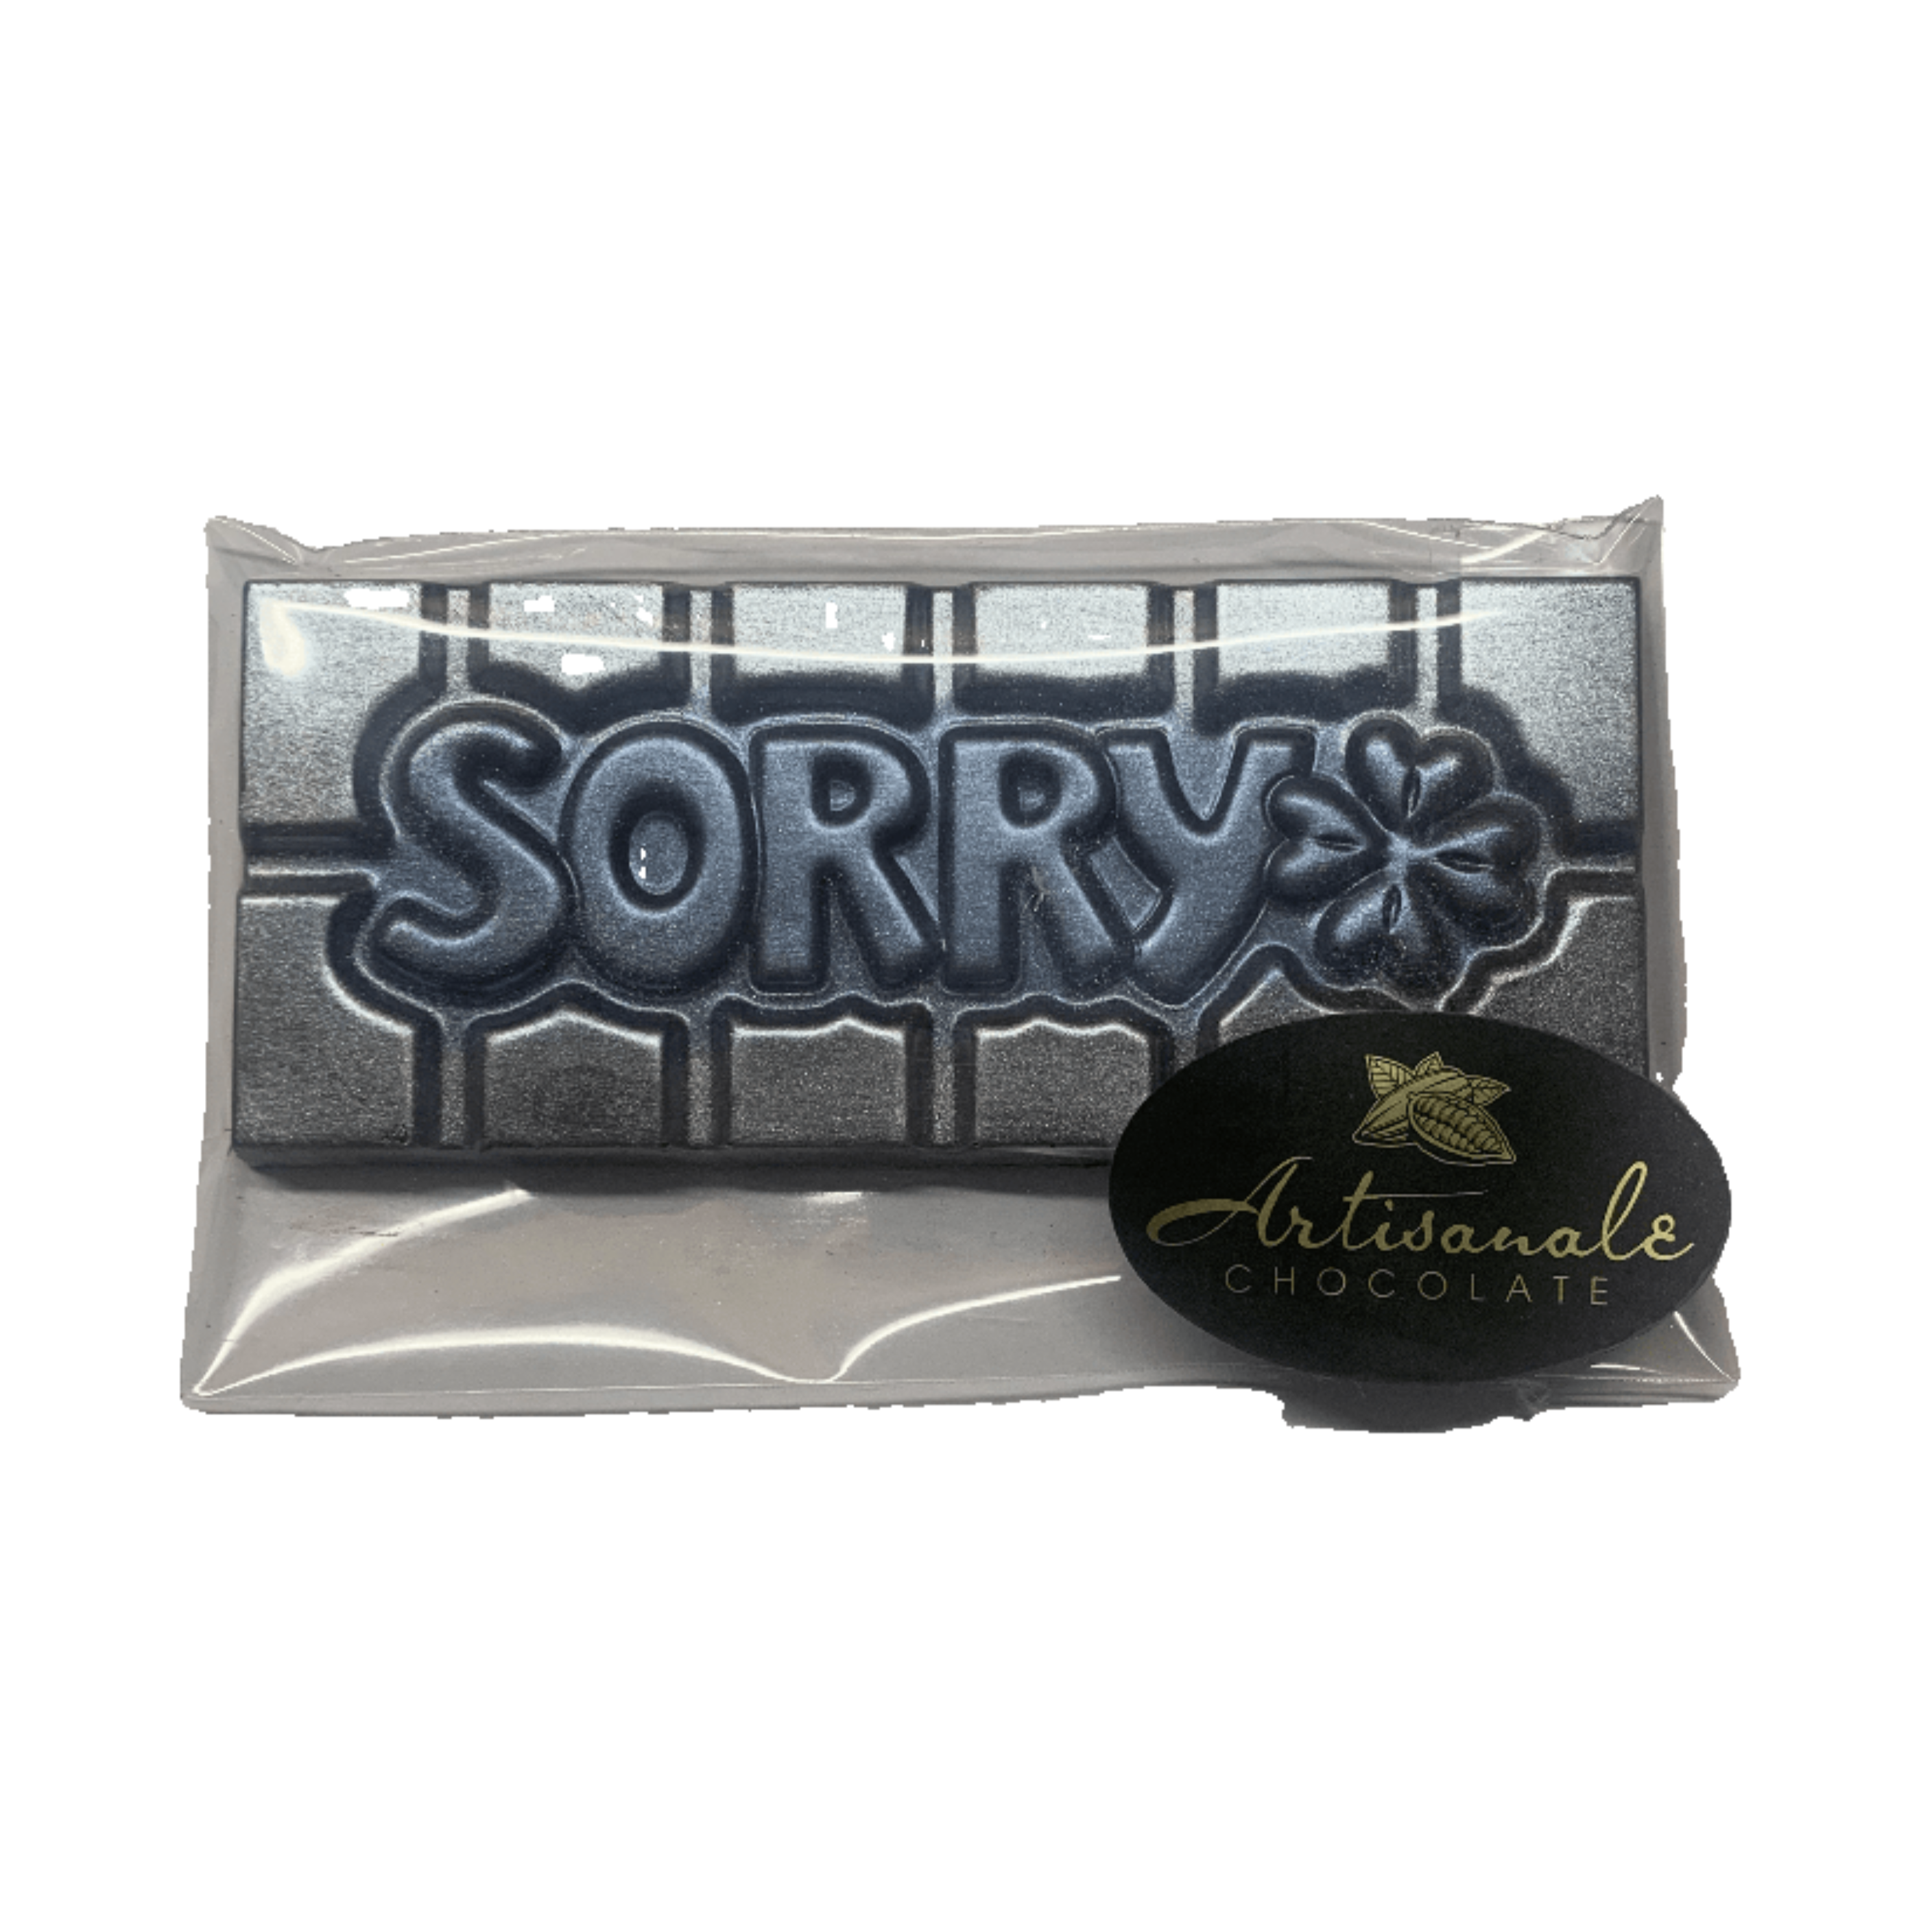 Say_Sorry_Wrapped-min.png